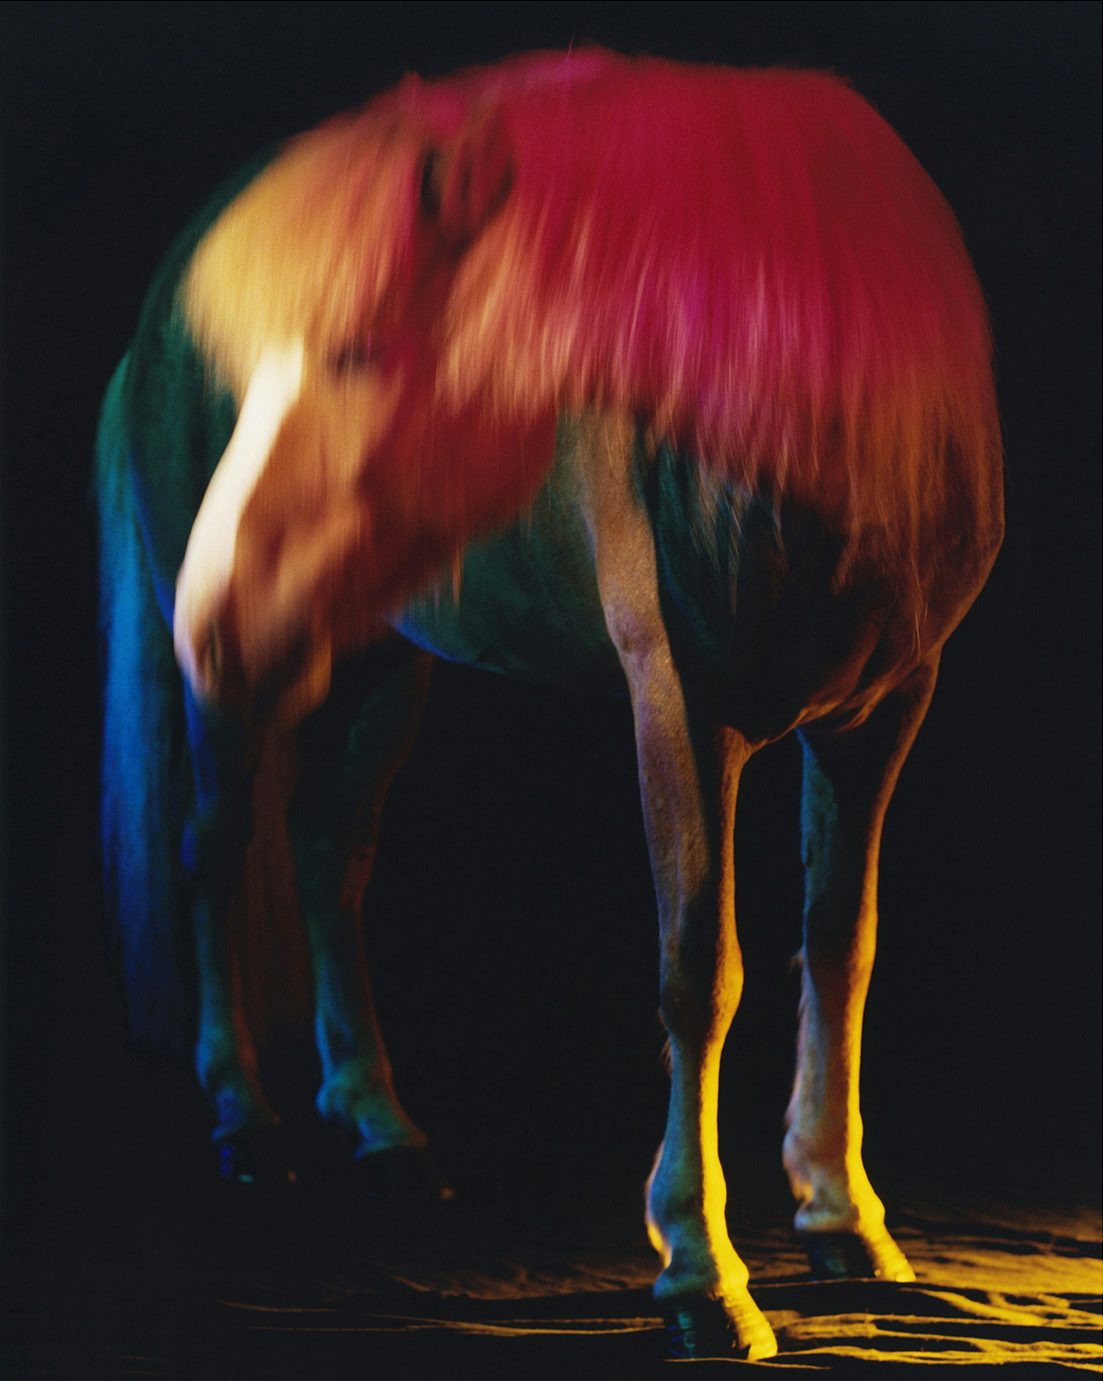 Image by Gareth McConnell from his project The Horses, which shows a horse illuminated with red, yellow and blue lighting against a dark backdrop